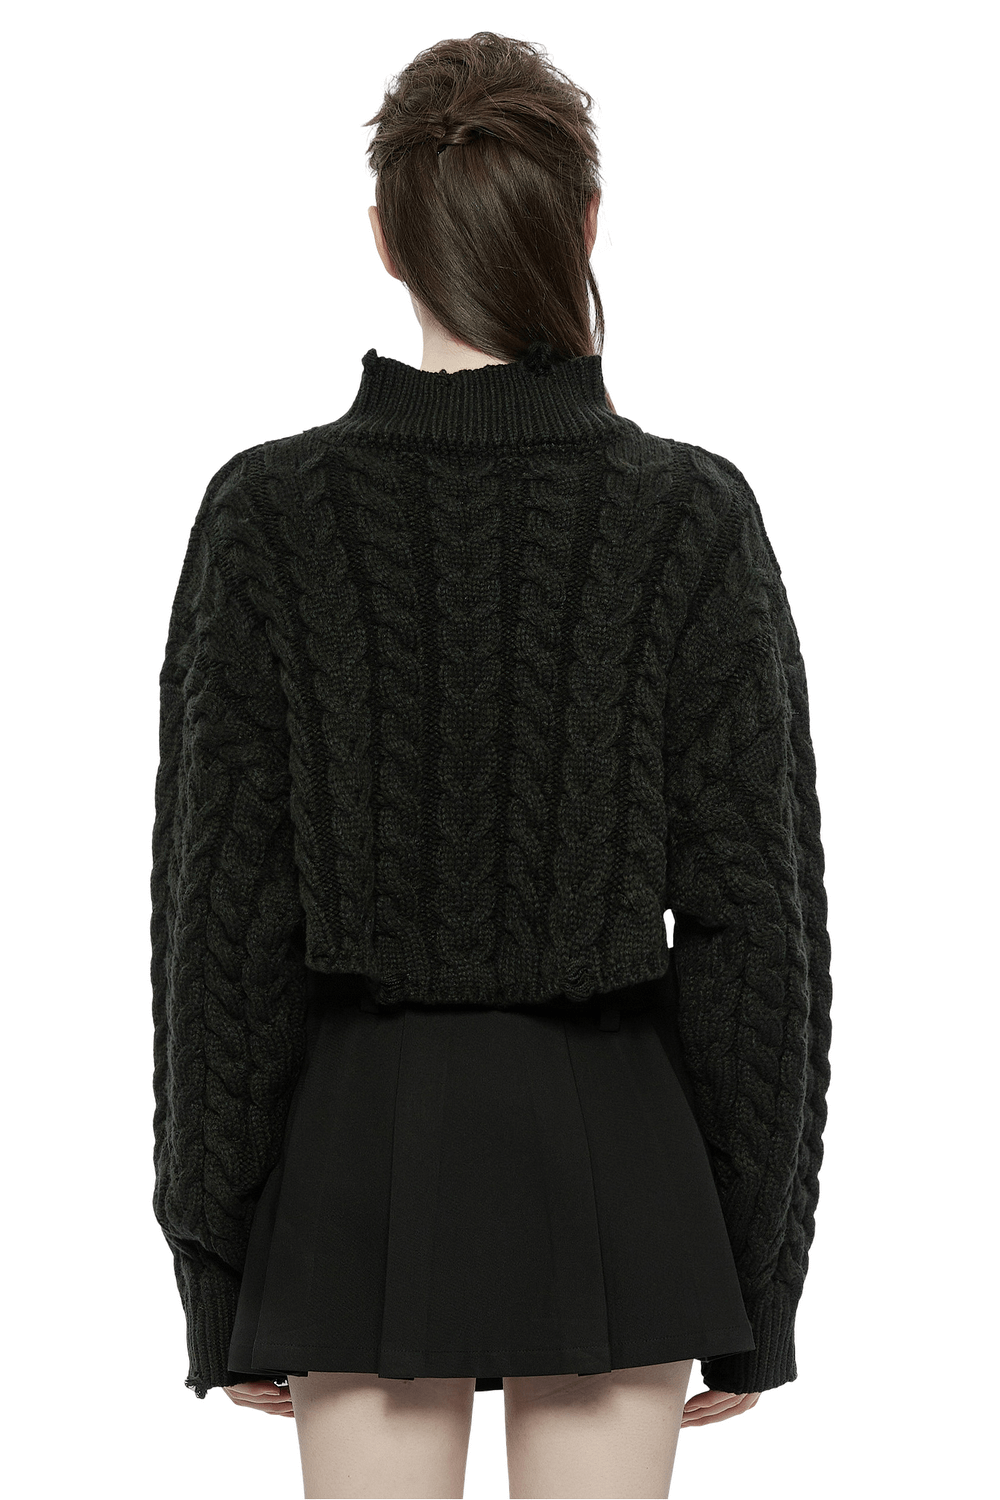 Chic Cropped Knit Turtleneck Sweater for Women